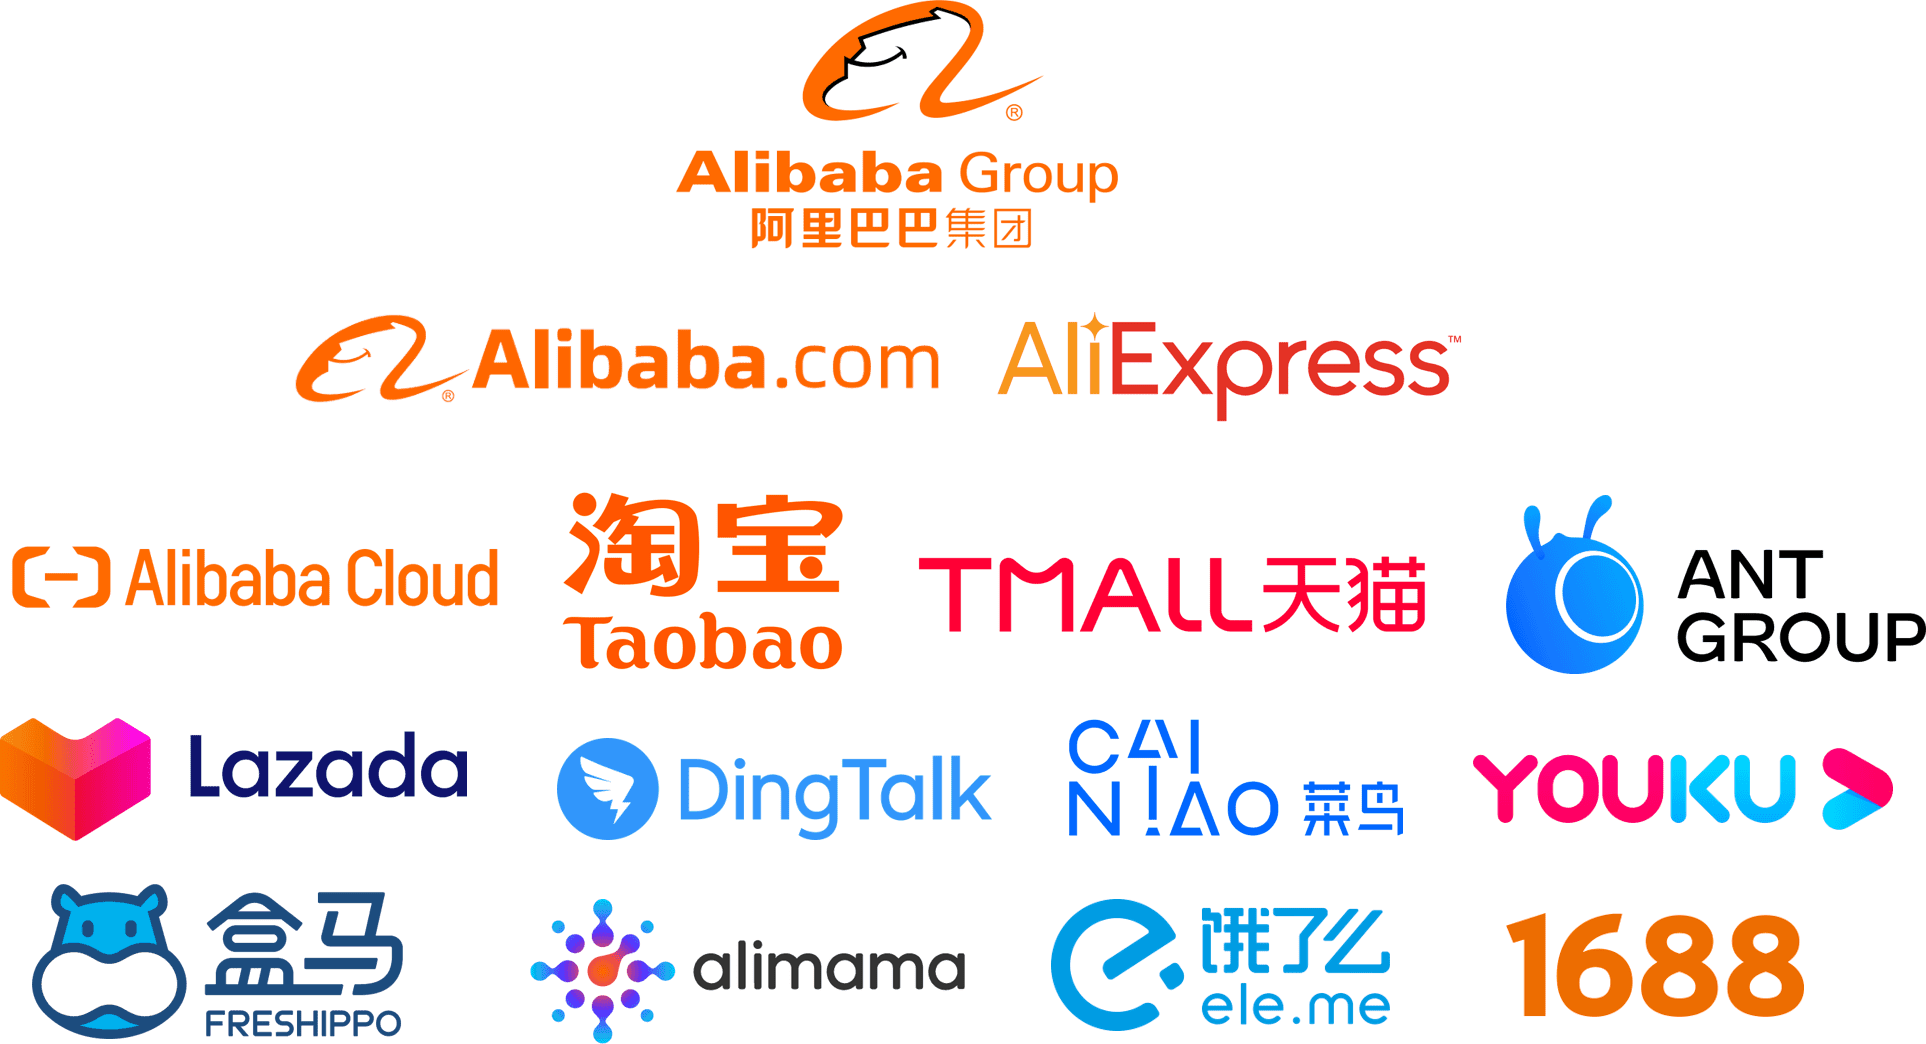 Companies in Alibaba Group